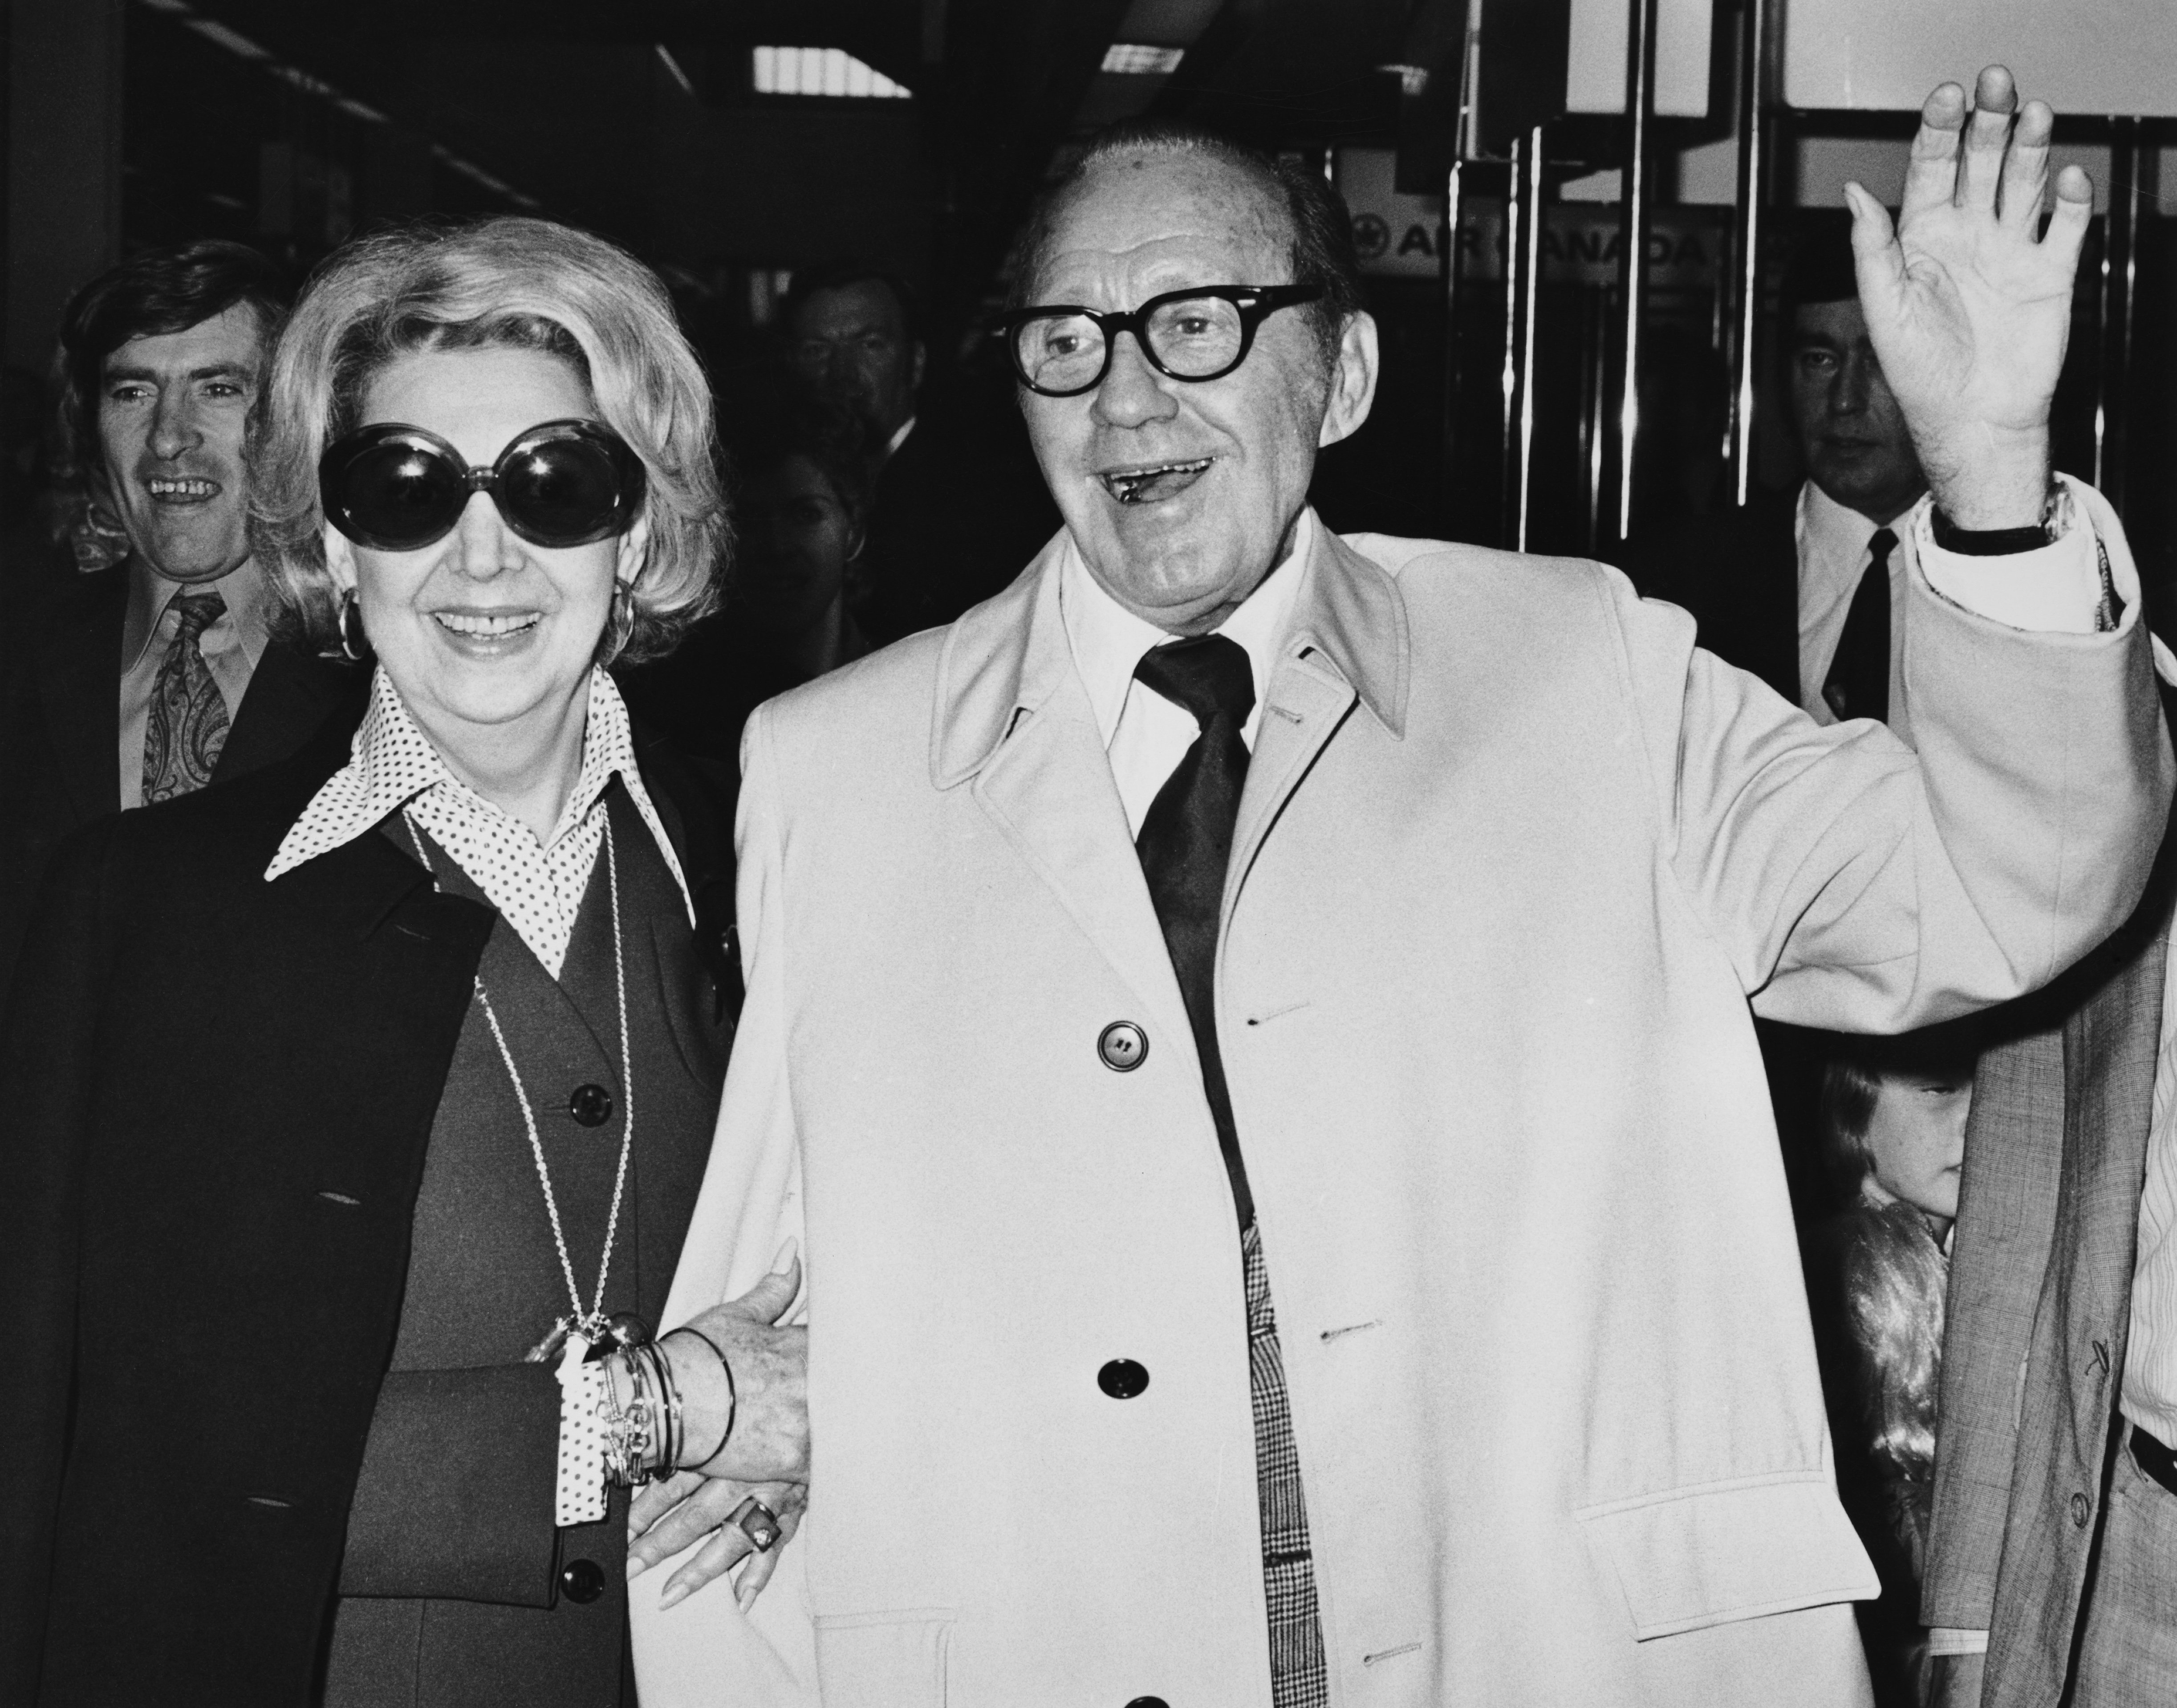 American actor and comedian Jack Benny (1894 - 1974) and his wife, actress Mary Livingstone (1908 - 1983) arrive at London Airport for a stage tour of Britain on June 12, 1973 | Source: Getty Images